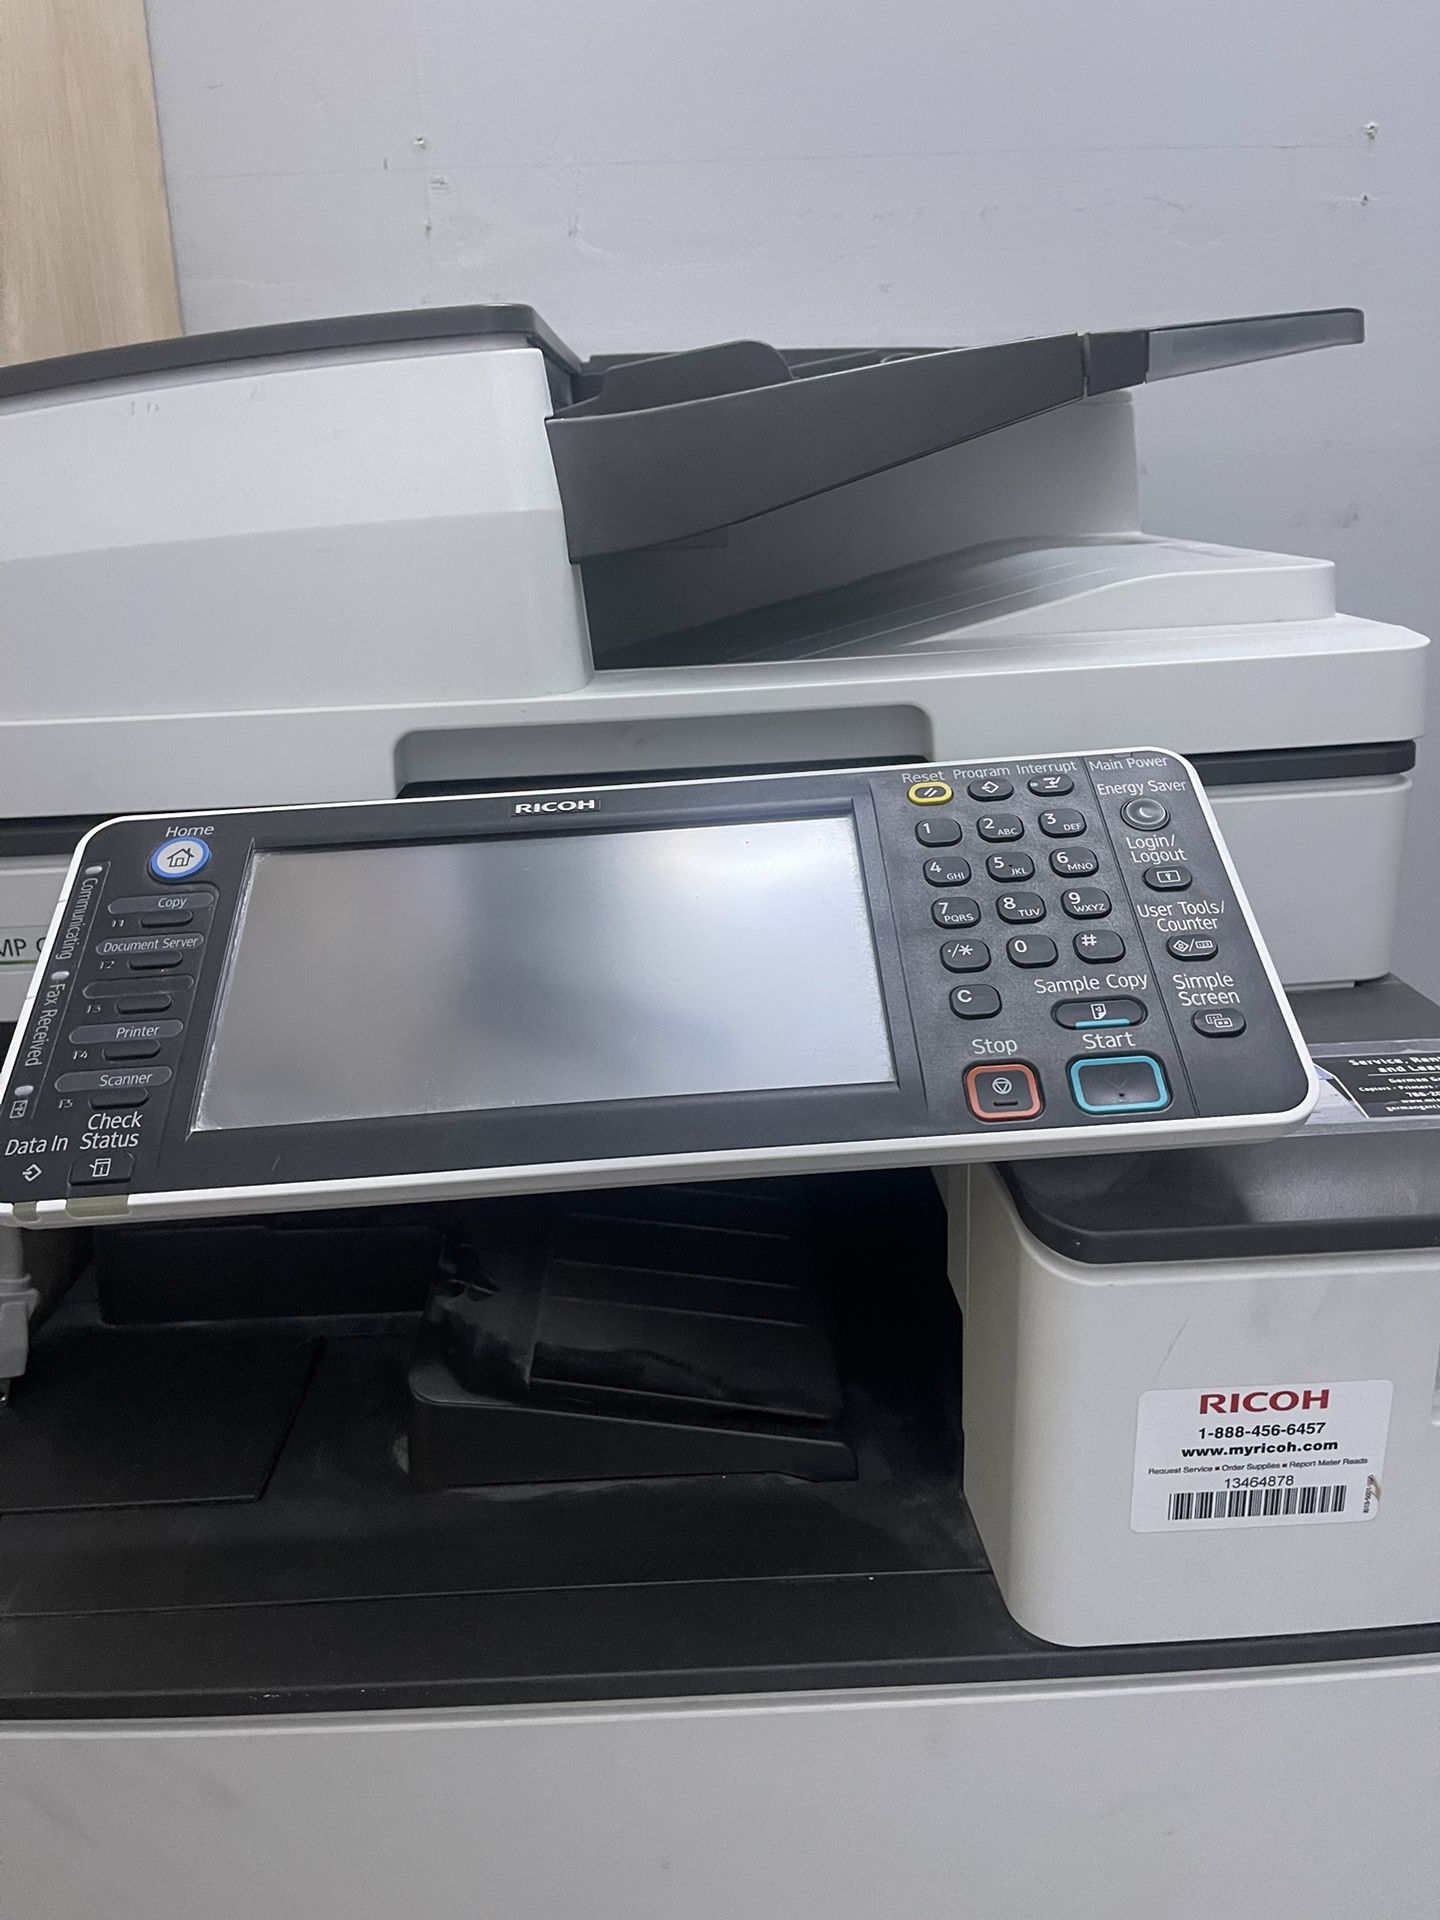 Ricoh corporate copier/printer/scanner/Fax - like new 